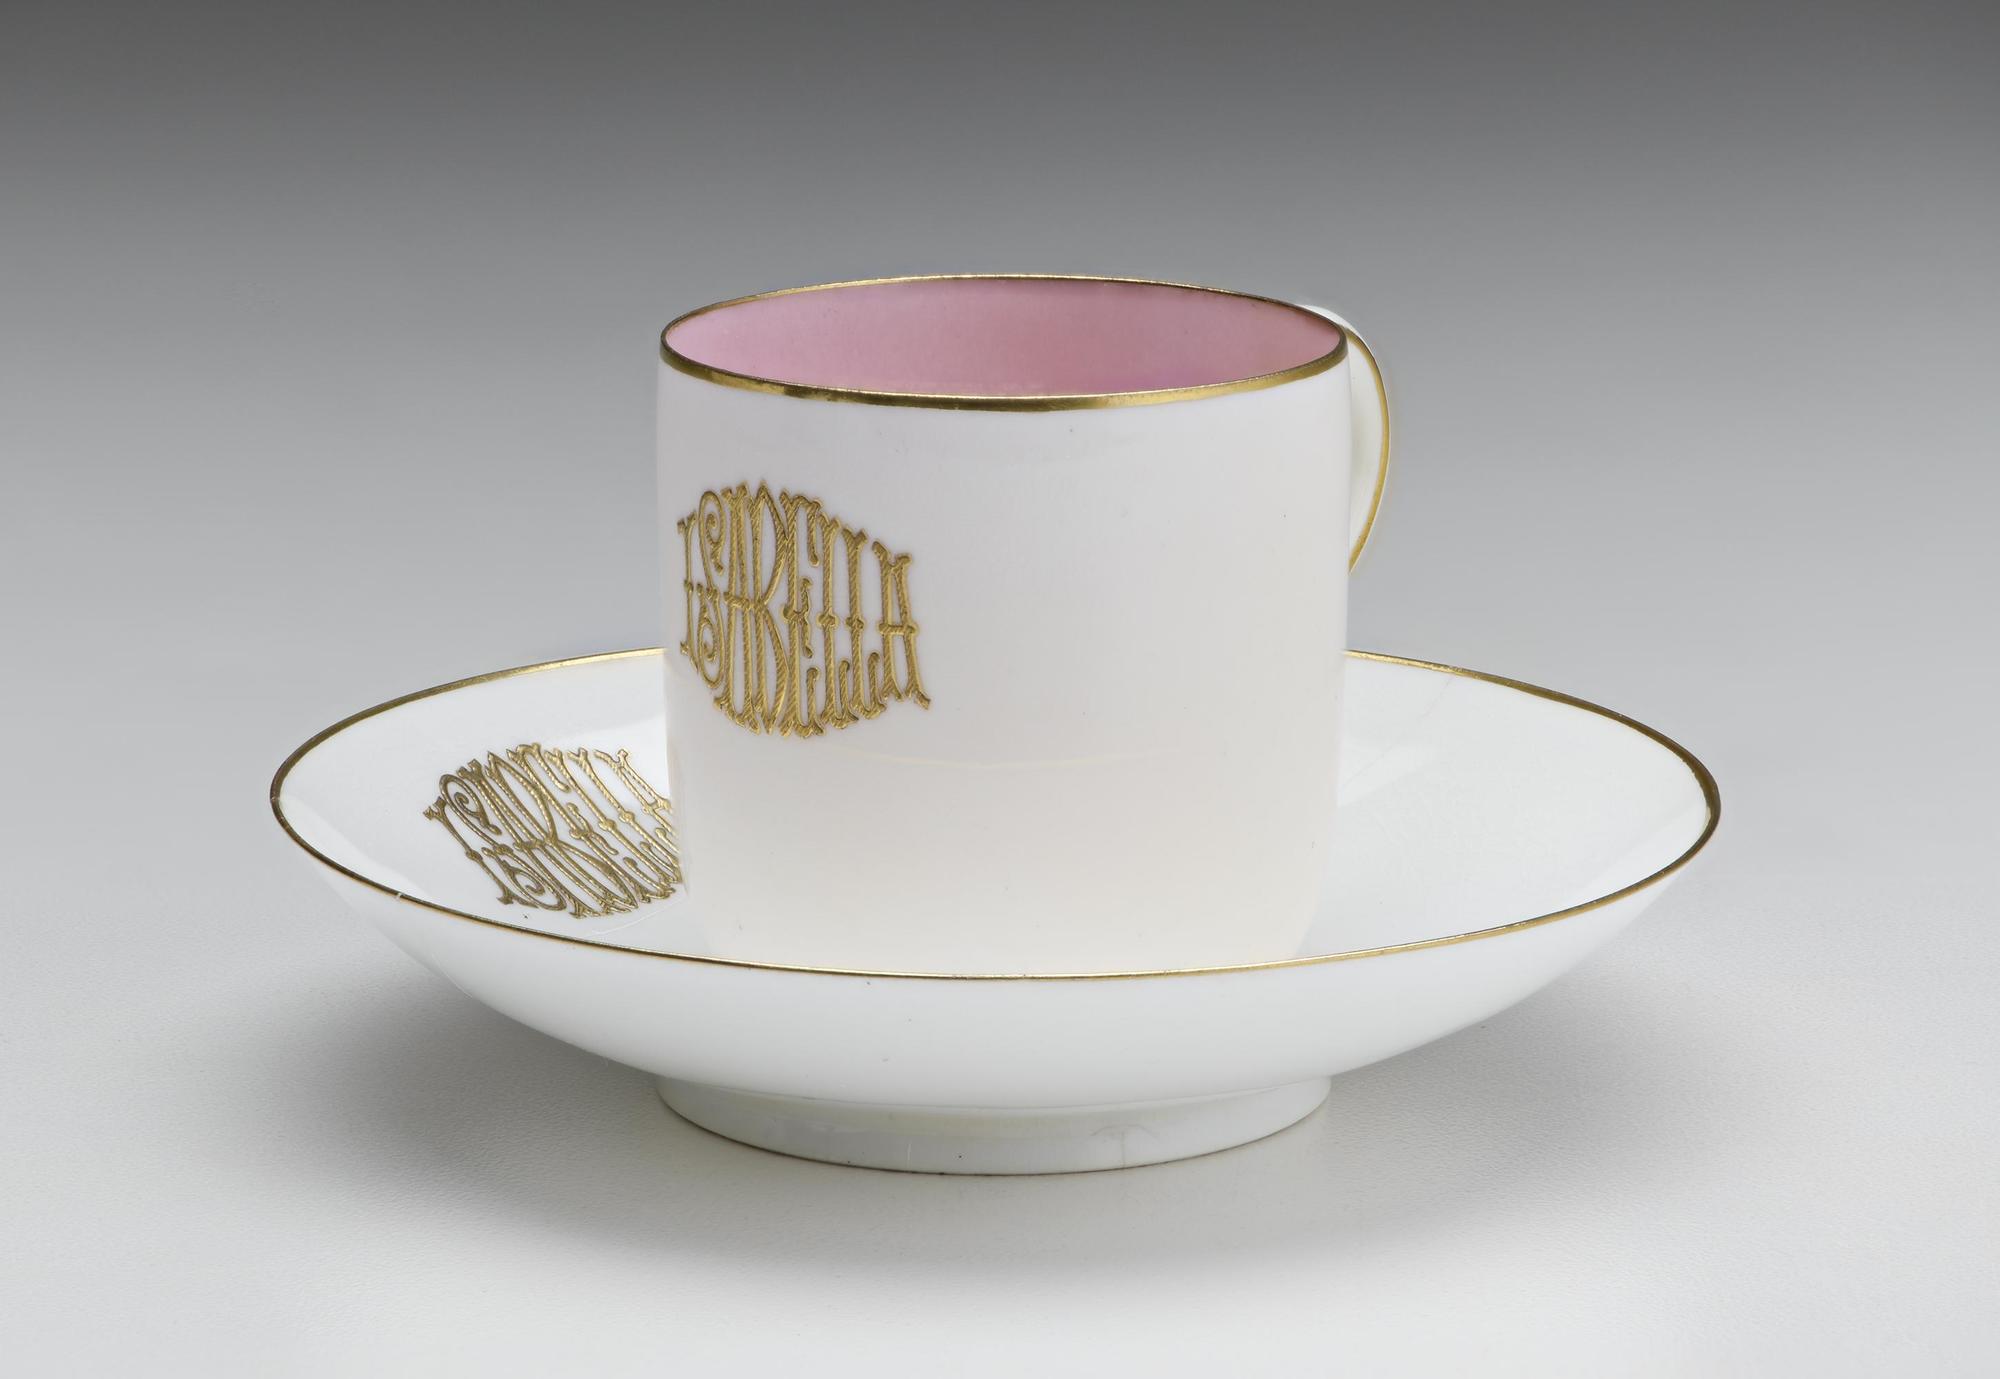 A teacup with the word Isabella